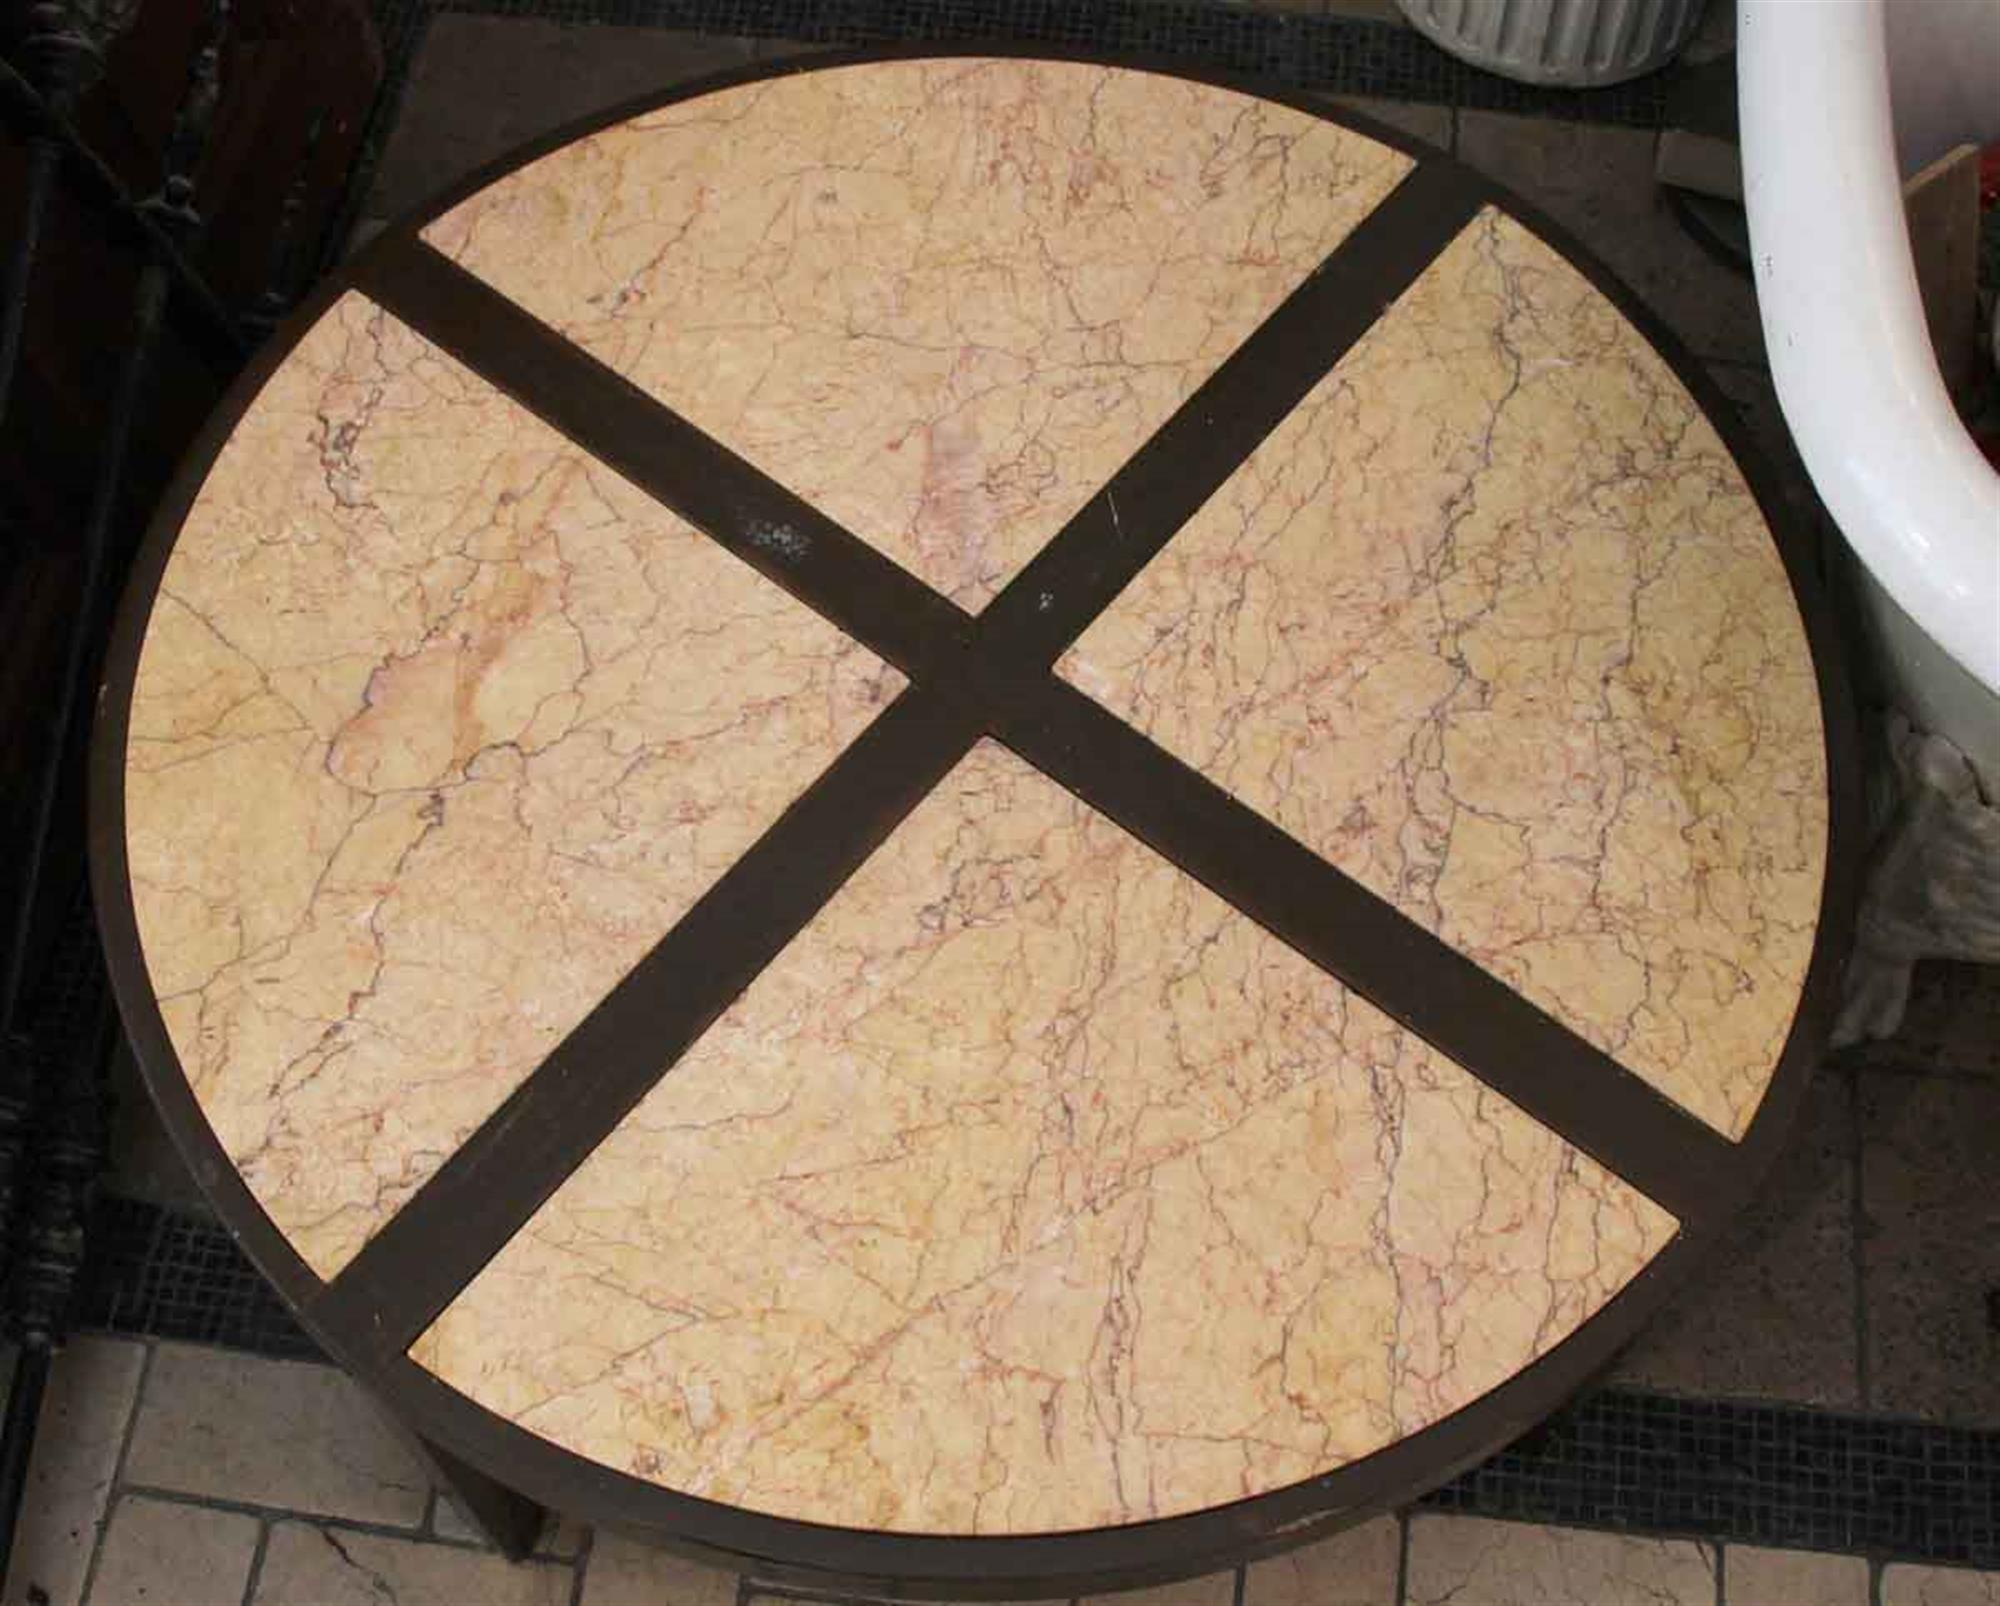 1950s dark wood tone Mid-Century Modern round coffee table with a four section marble top. Some minor wear from use. This can be seen at our 5 East 16th St location on Union Square in Manhattan.